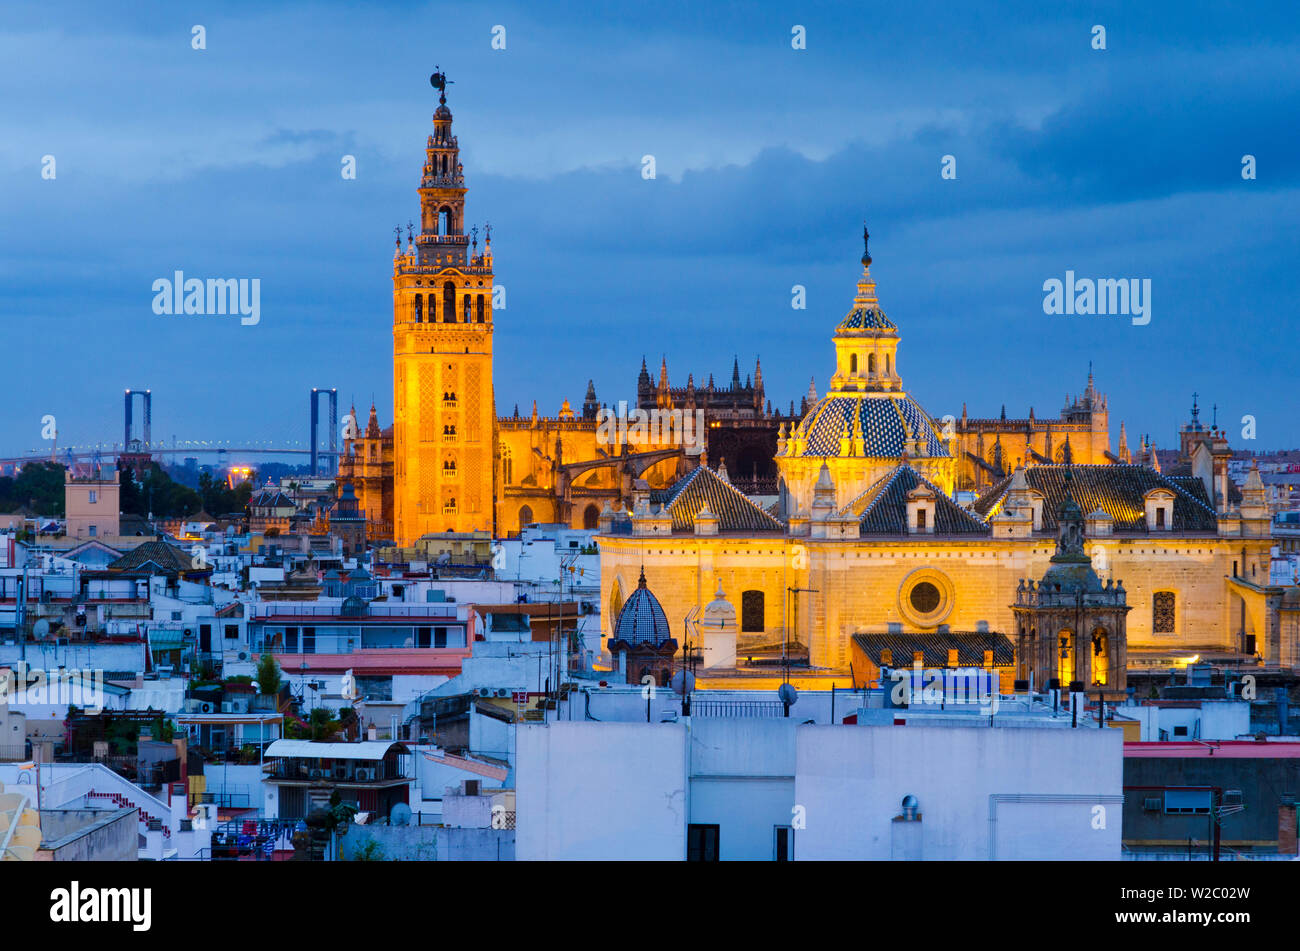 Spain, Andalucia, Seville Province, Seville,  Cathedral of Seville, The Giralda Tower (La Giralda) and Church of the Saviour (Iglesia del Salvador) Stock Photo